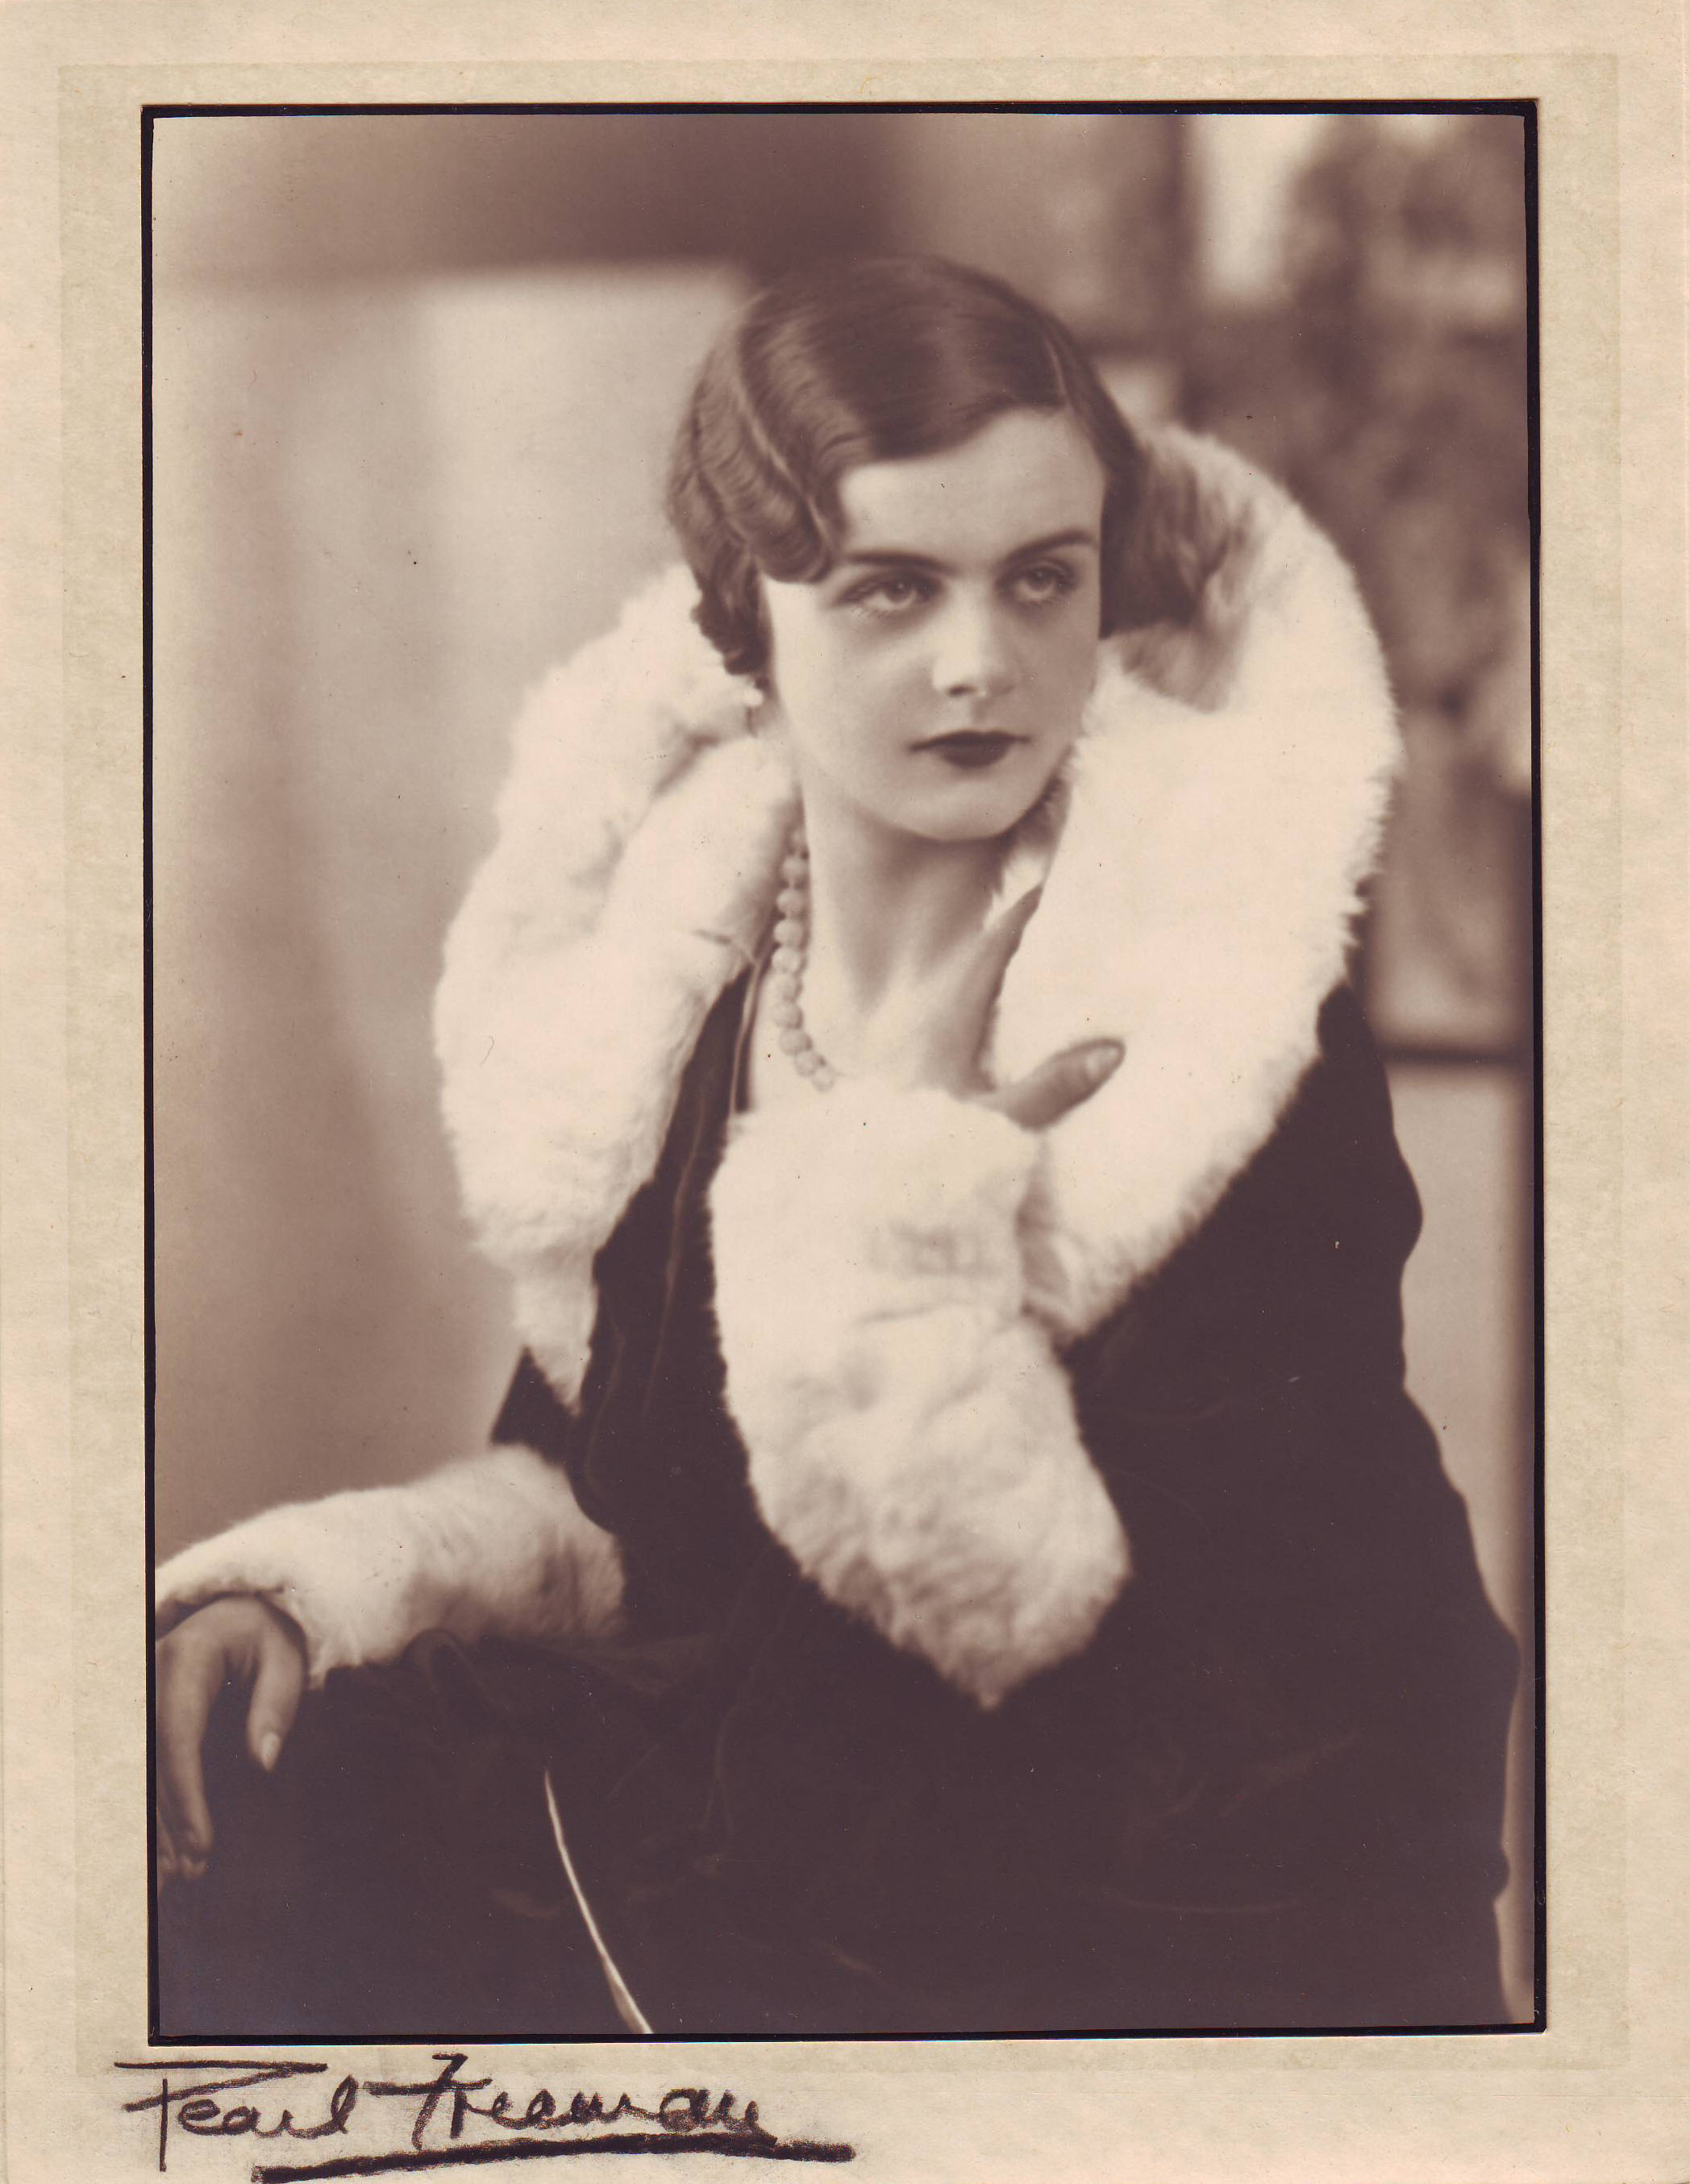 Clare Hollingworth, likely at her 21st birthday, in 1932.